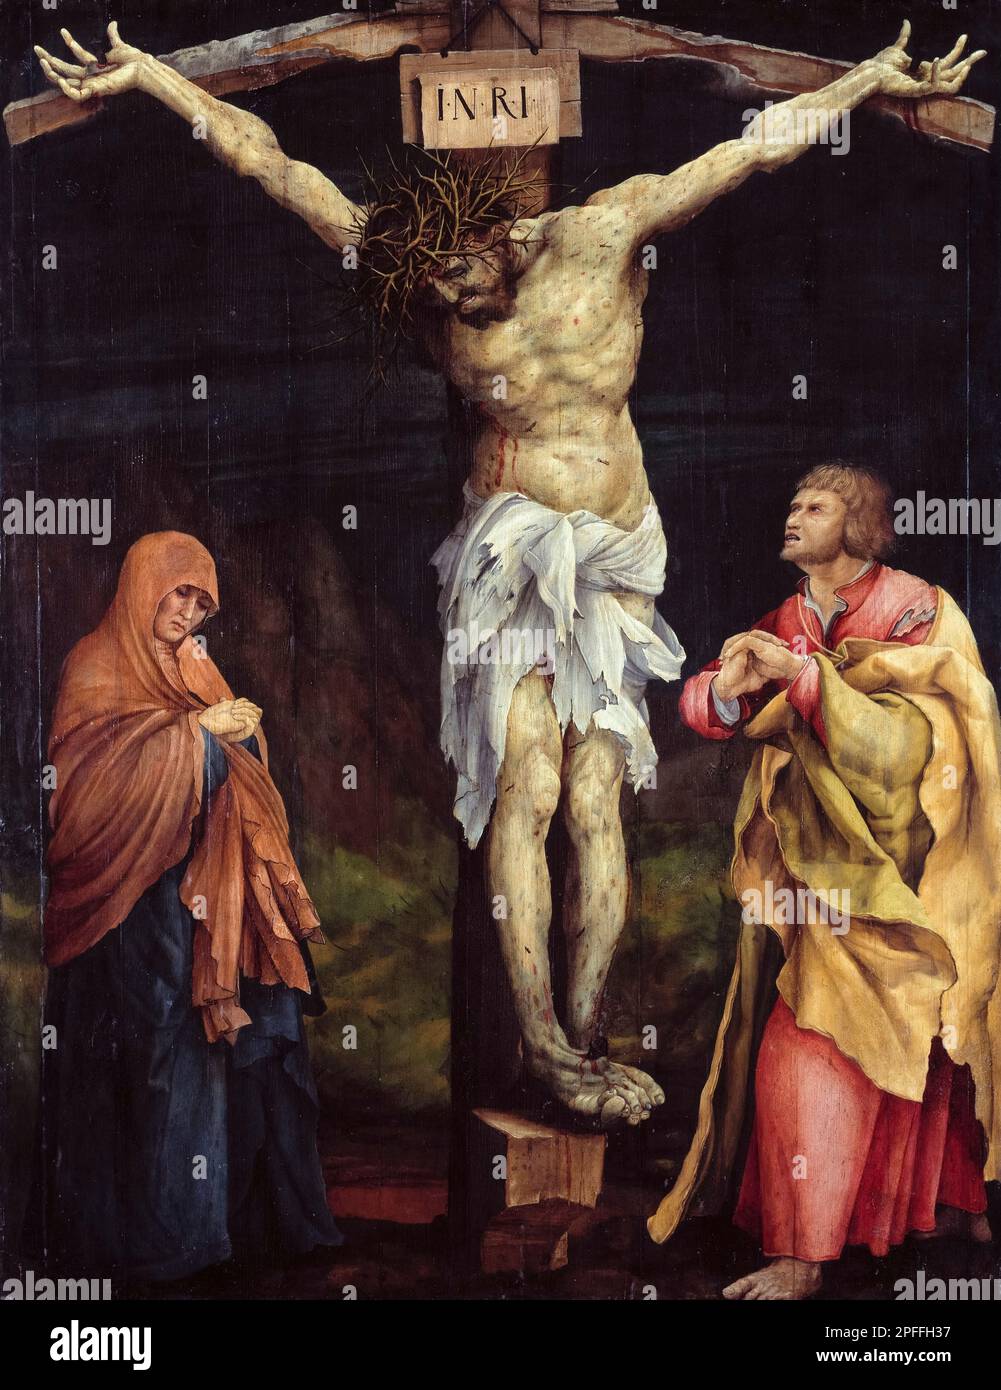 Crucifixion, painting in mixed media on wood by Matthias Grünewald, 1523-1524 Stock Photo